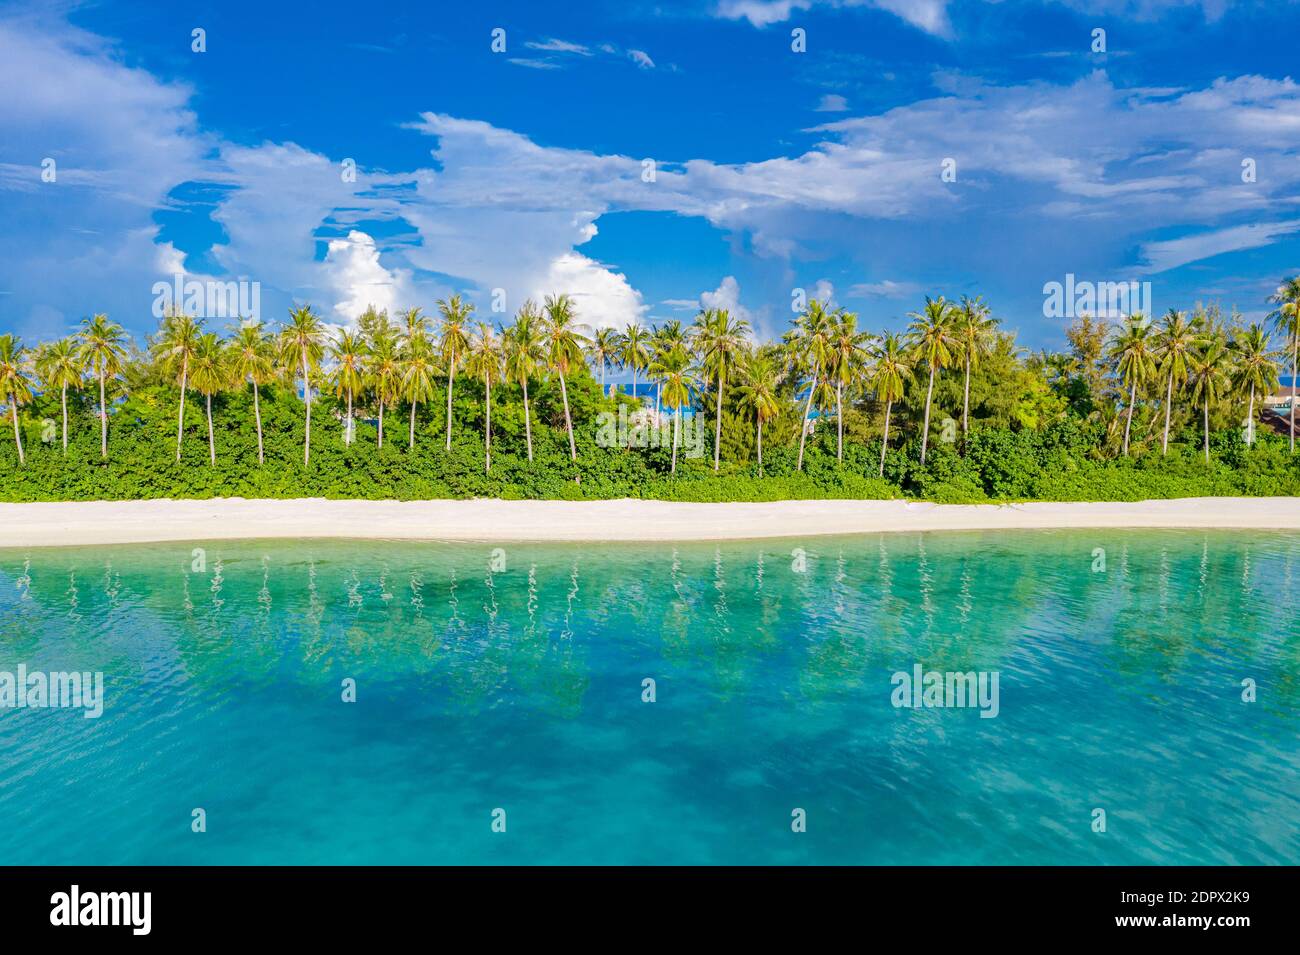 Tropical beach nature landscape under sunlight. Stunning natural environment, tropical patter water reflection. Amazing nature exotic vacation holiday Stock Photo